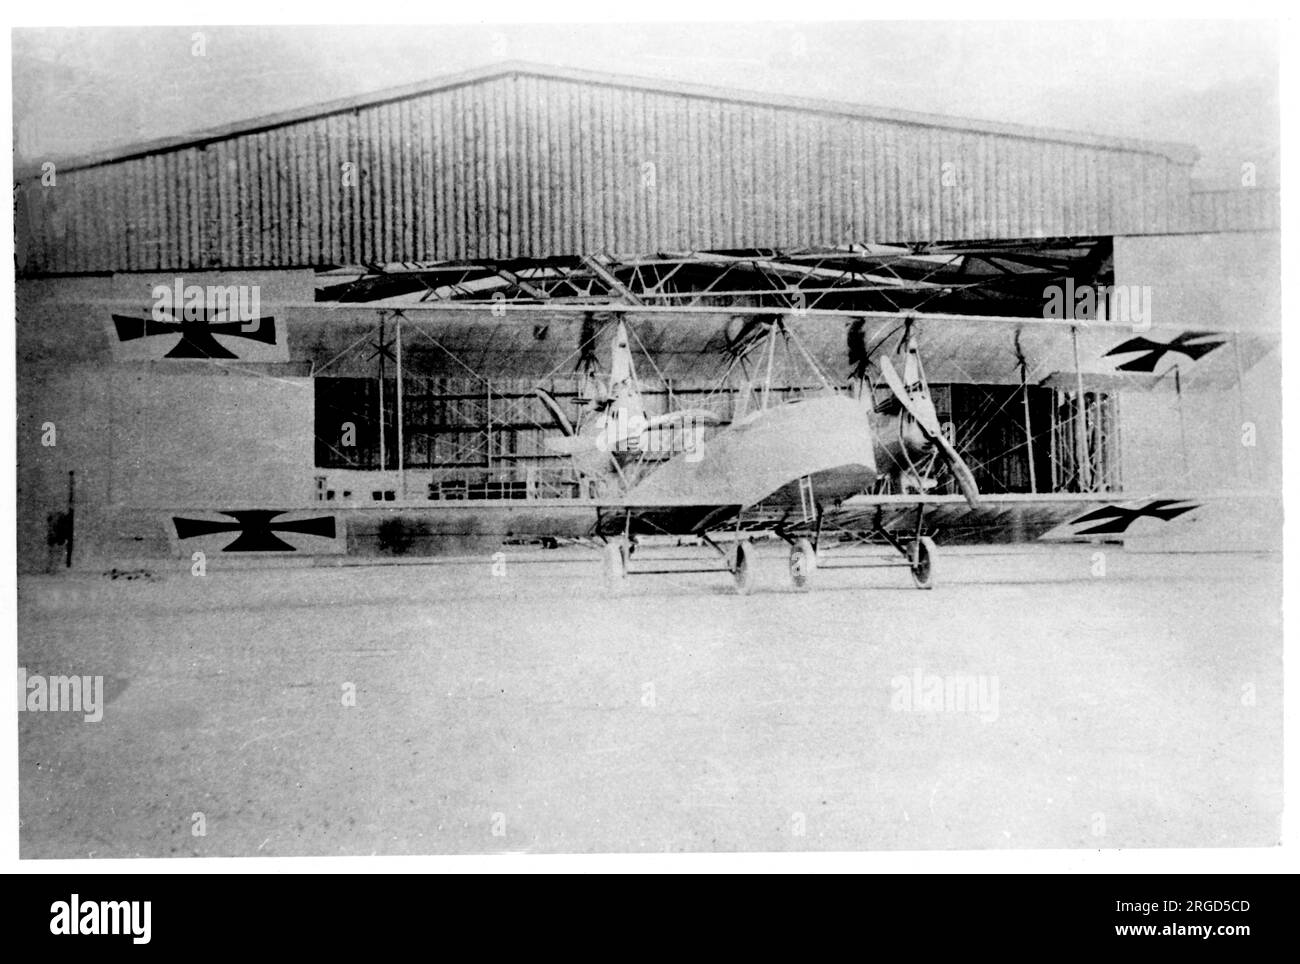 Daimler R.I (G.I) '478/15', a four-engined bomber in the R (Riesenflugzeug) category, at Sindelfingen in Autumn 1915. (Originally designated G.I in the Grossflugzeug category, but re-designated because the engines were unable to be serviced in flight; a requirement for R (Riesenflugzeug) category designs). Stock Photo